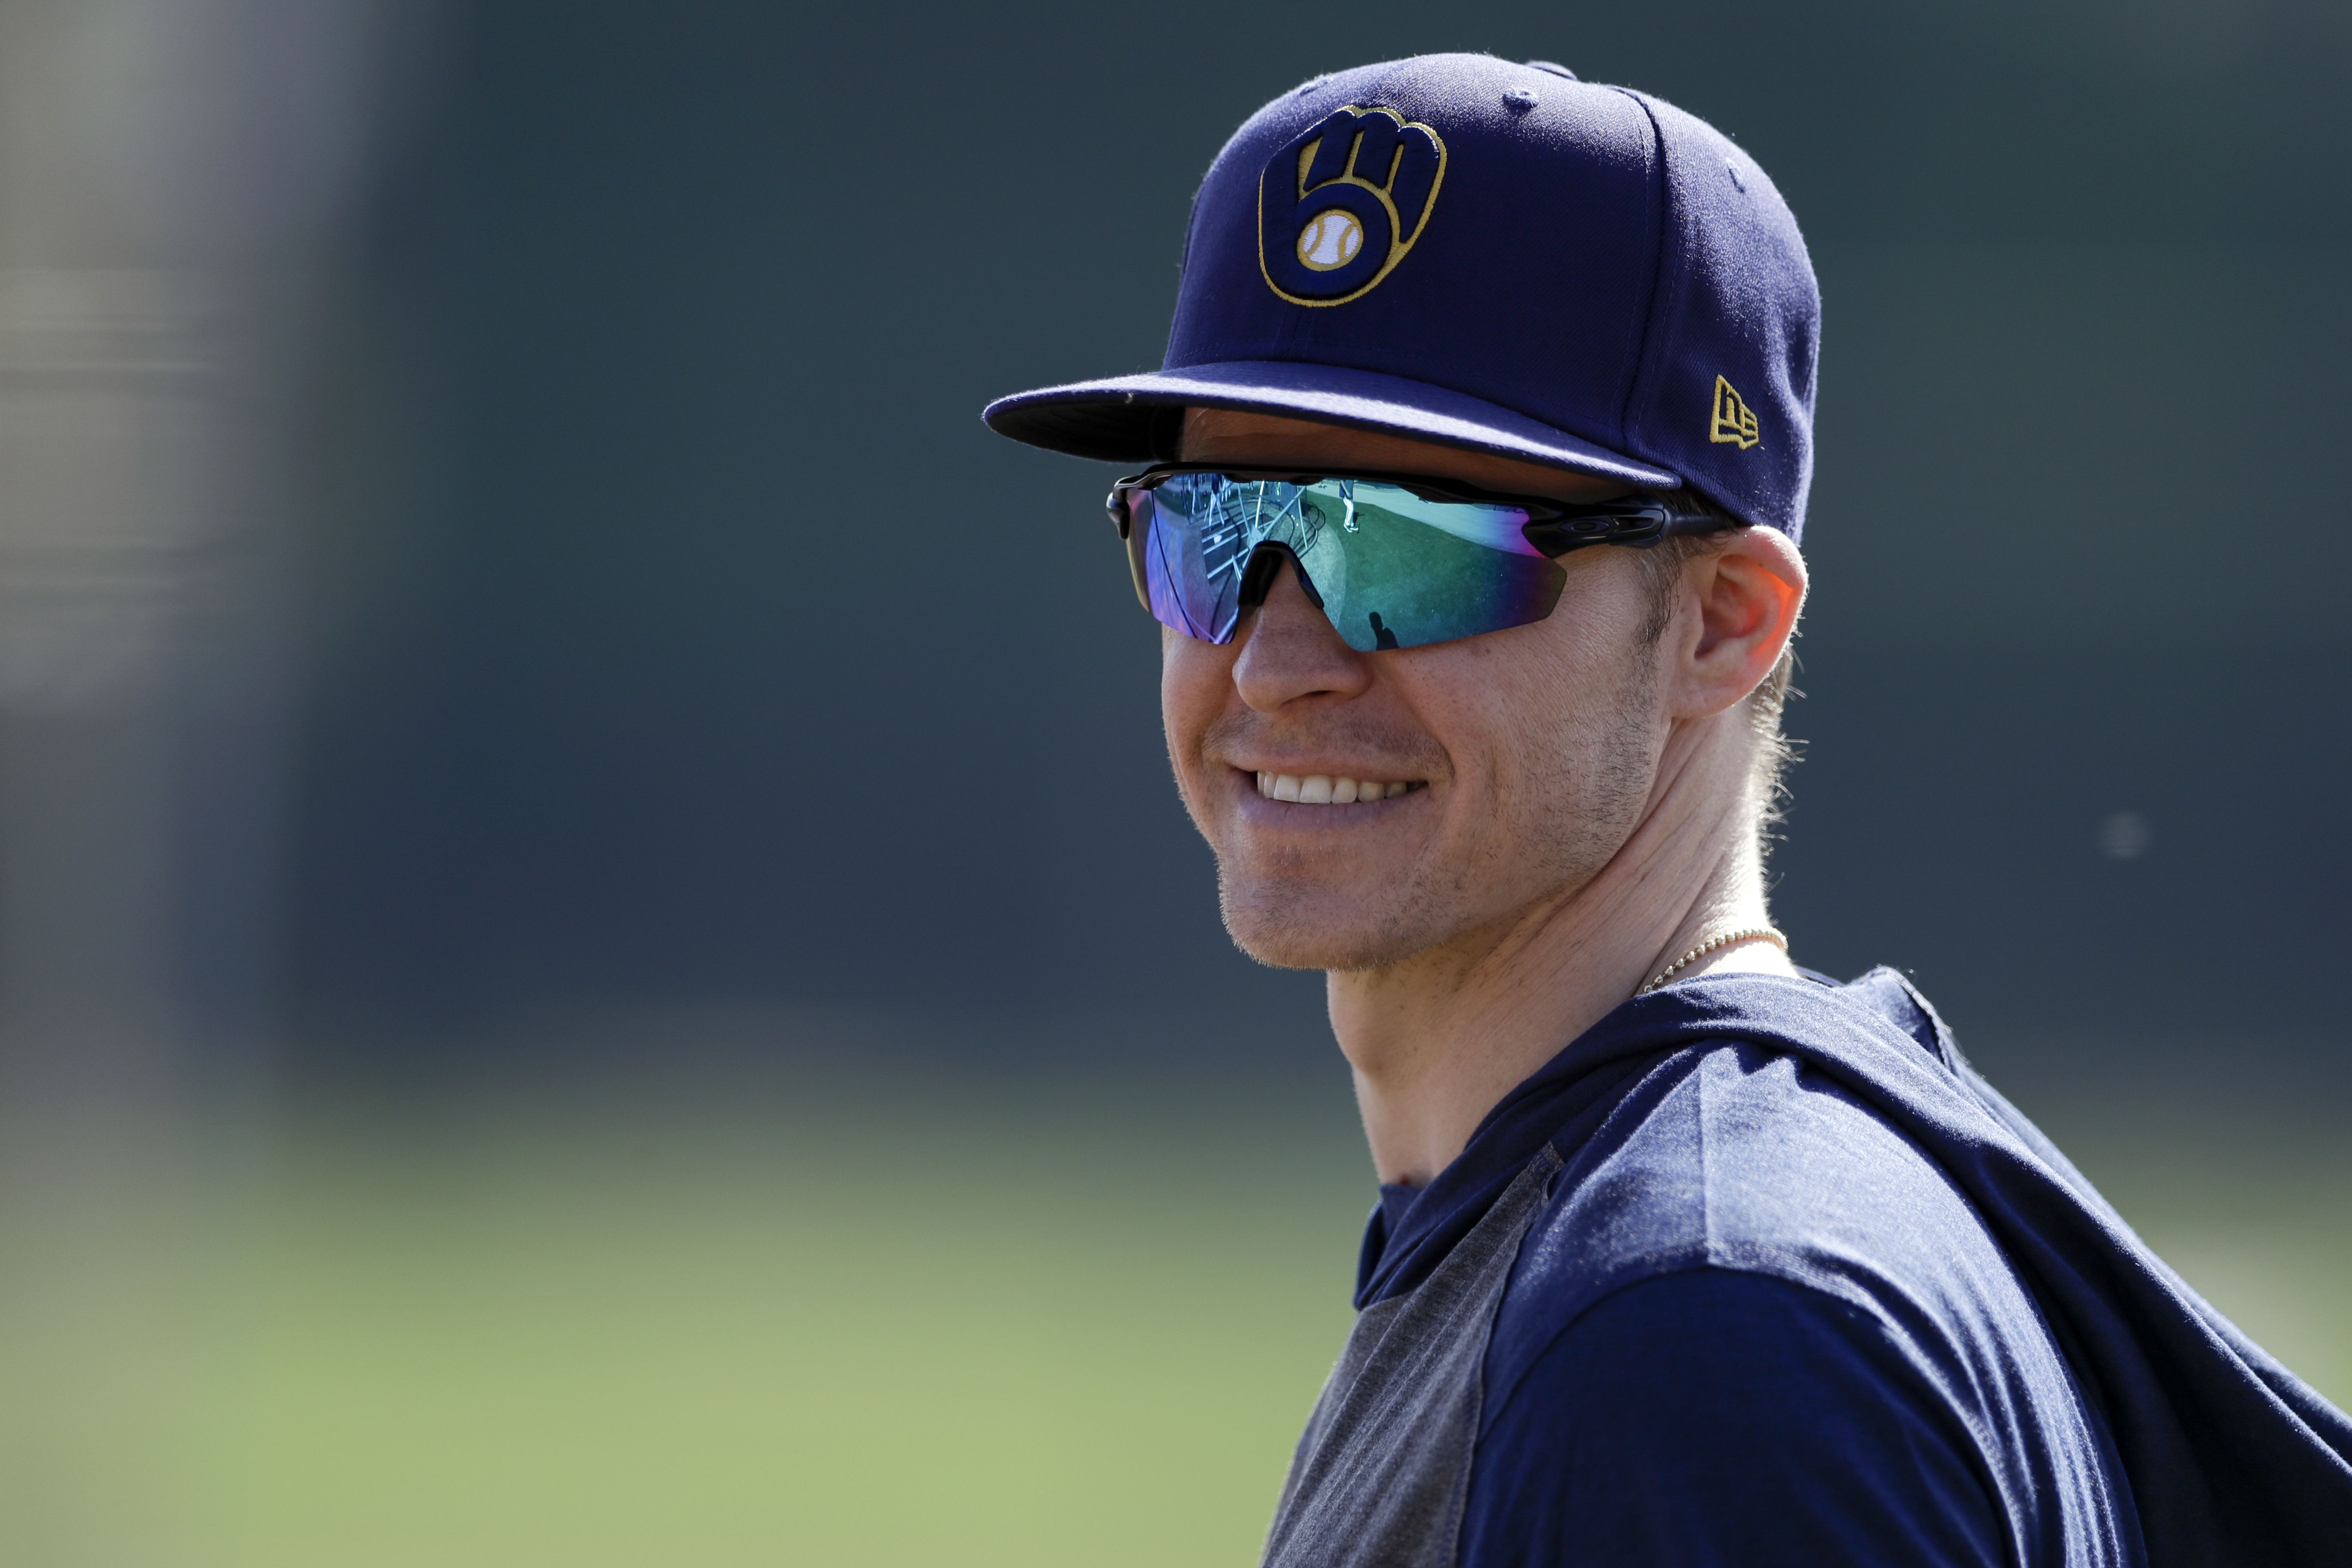 Milwaukee Brewers to sign Brock Holt, per report - Brew Crew Ball